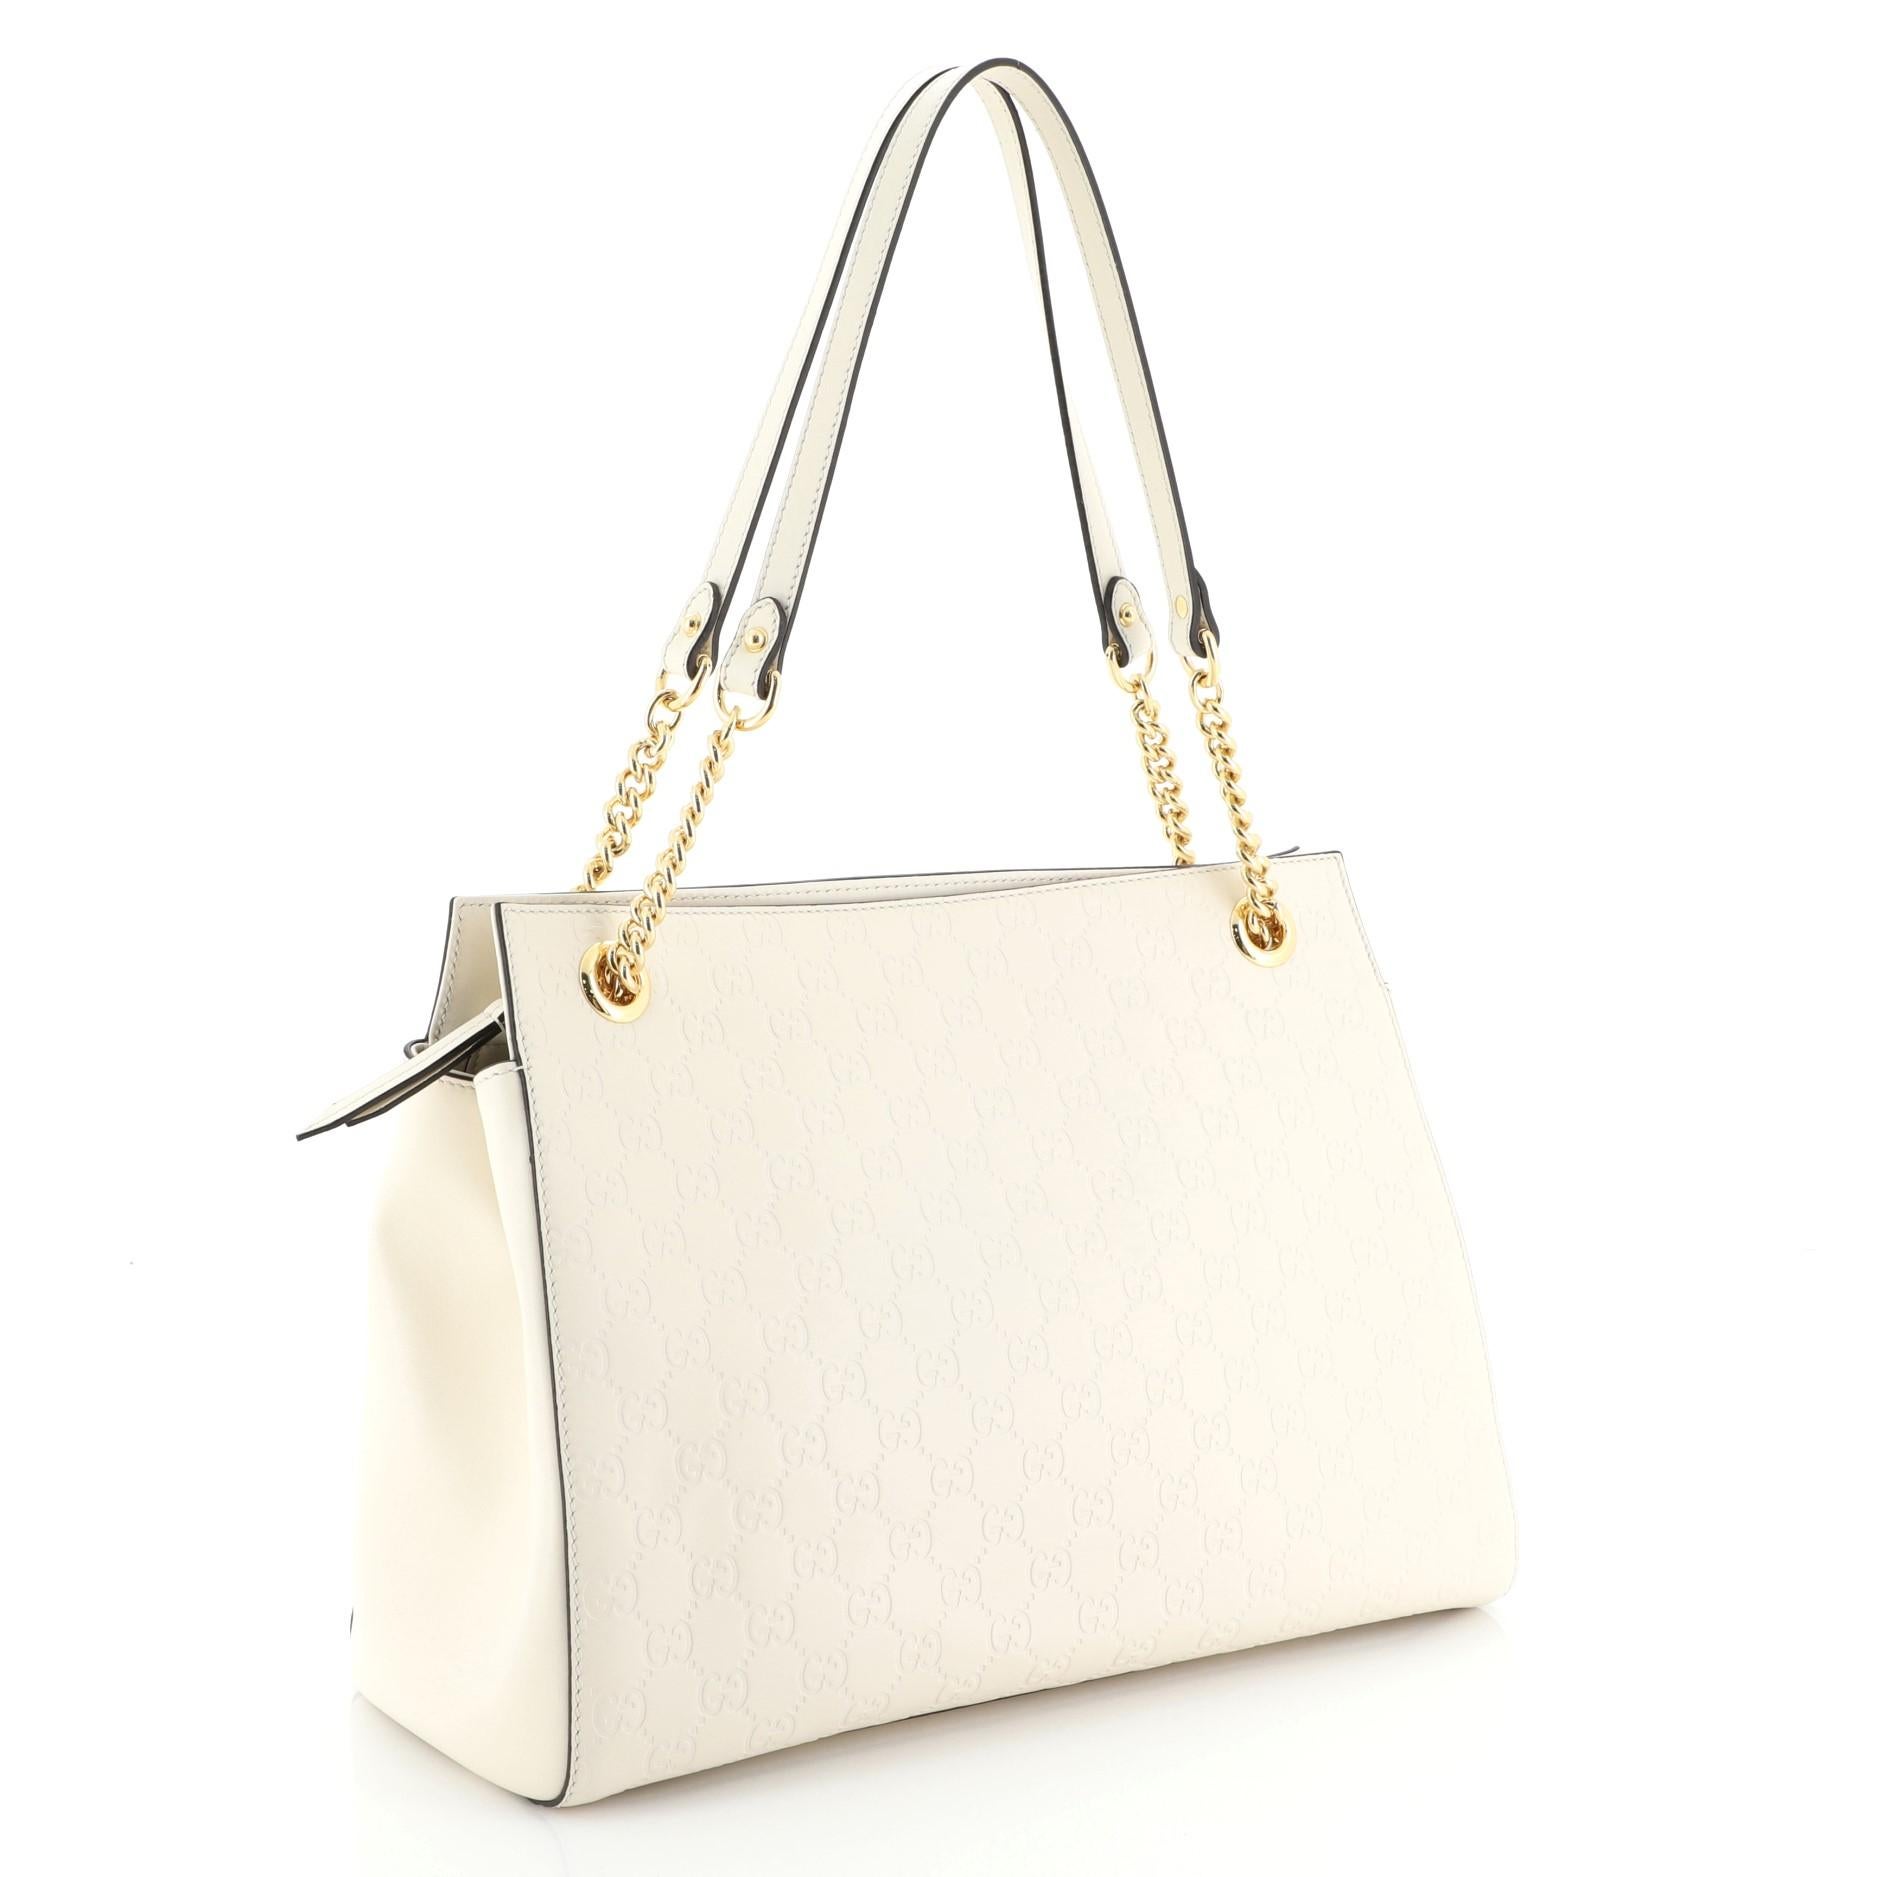 This Gucci Soft Signature Shoulder Bag Guccissima Leather Large, crafted from white guccissima leather, features chain-link shoulder straps with leather pads and gold-tone hardware. Its zip closure opens to a neutral microfiber interior with side